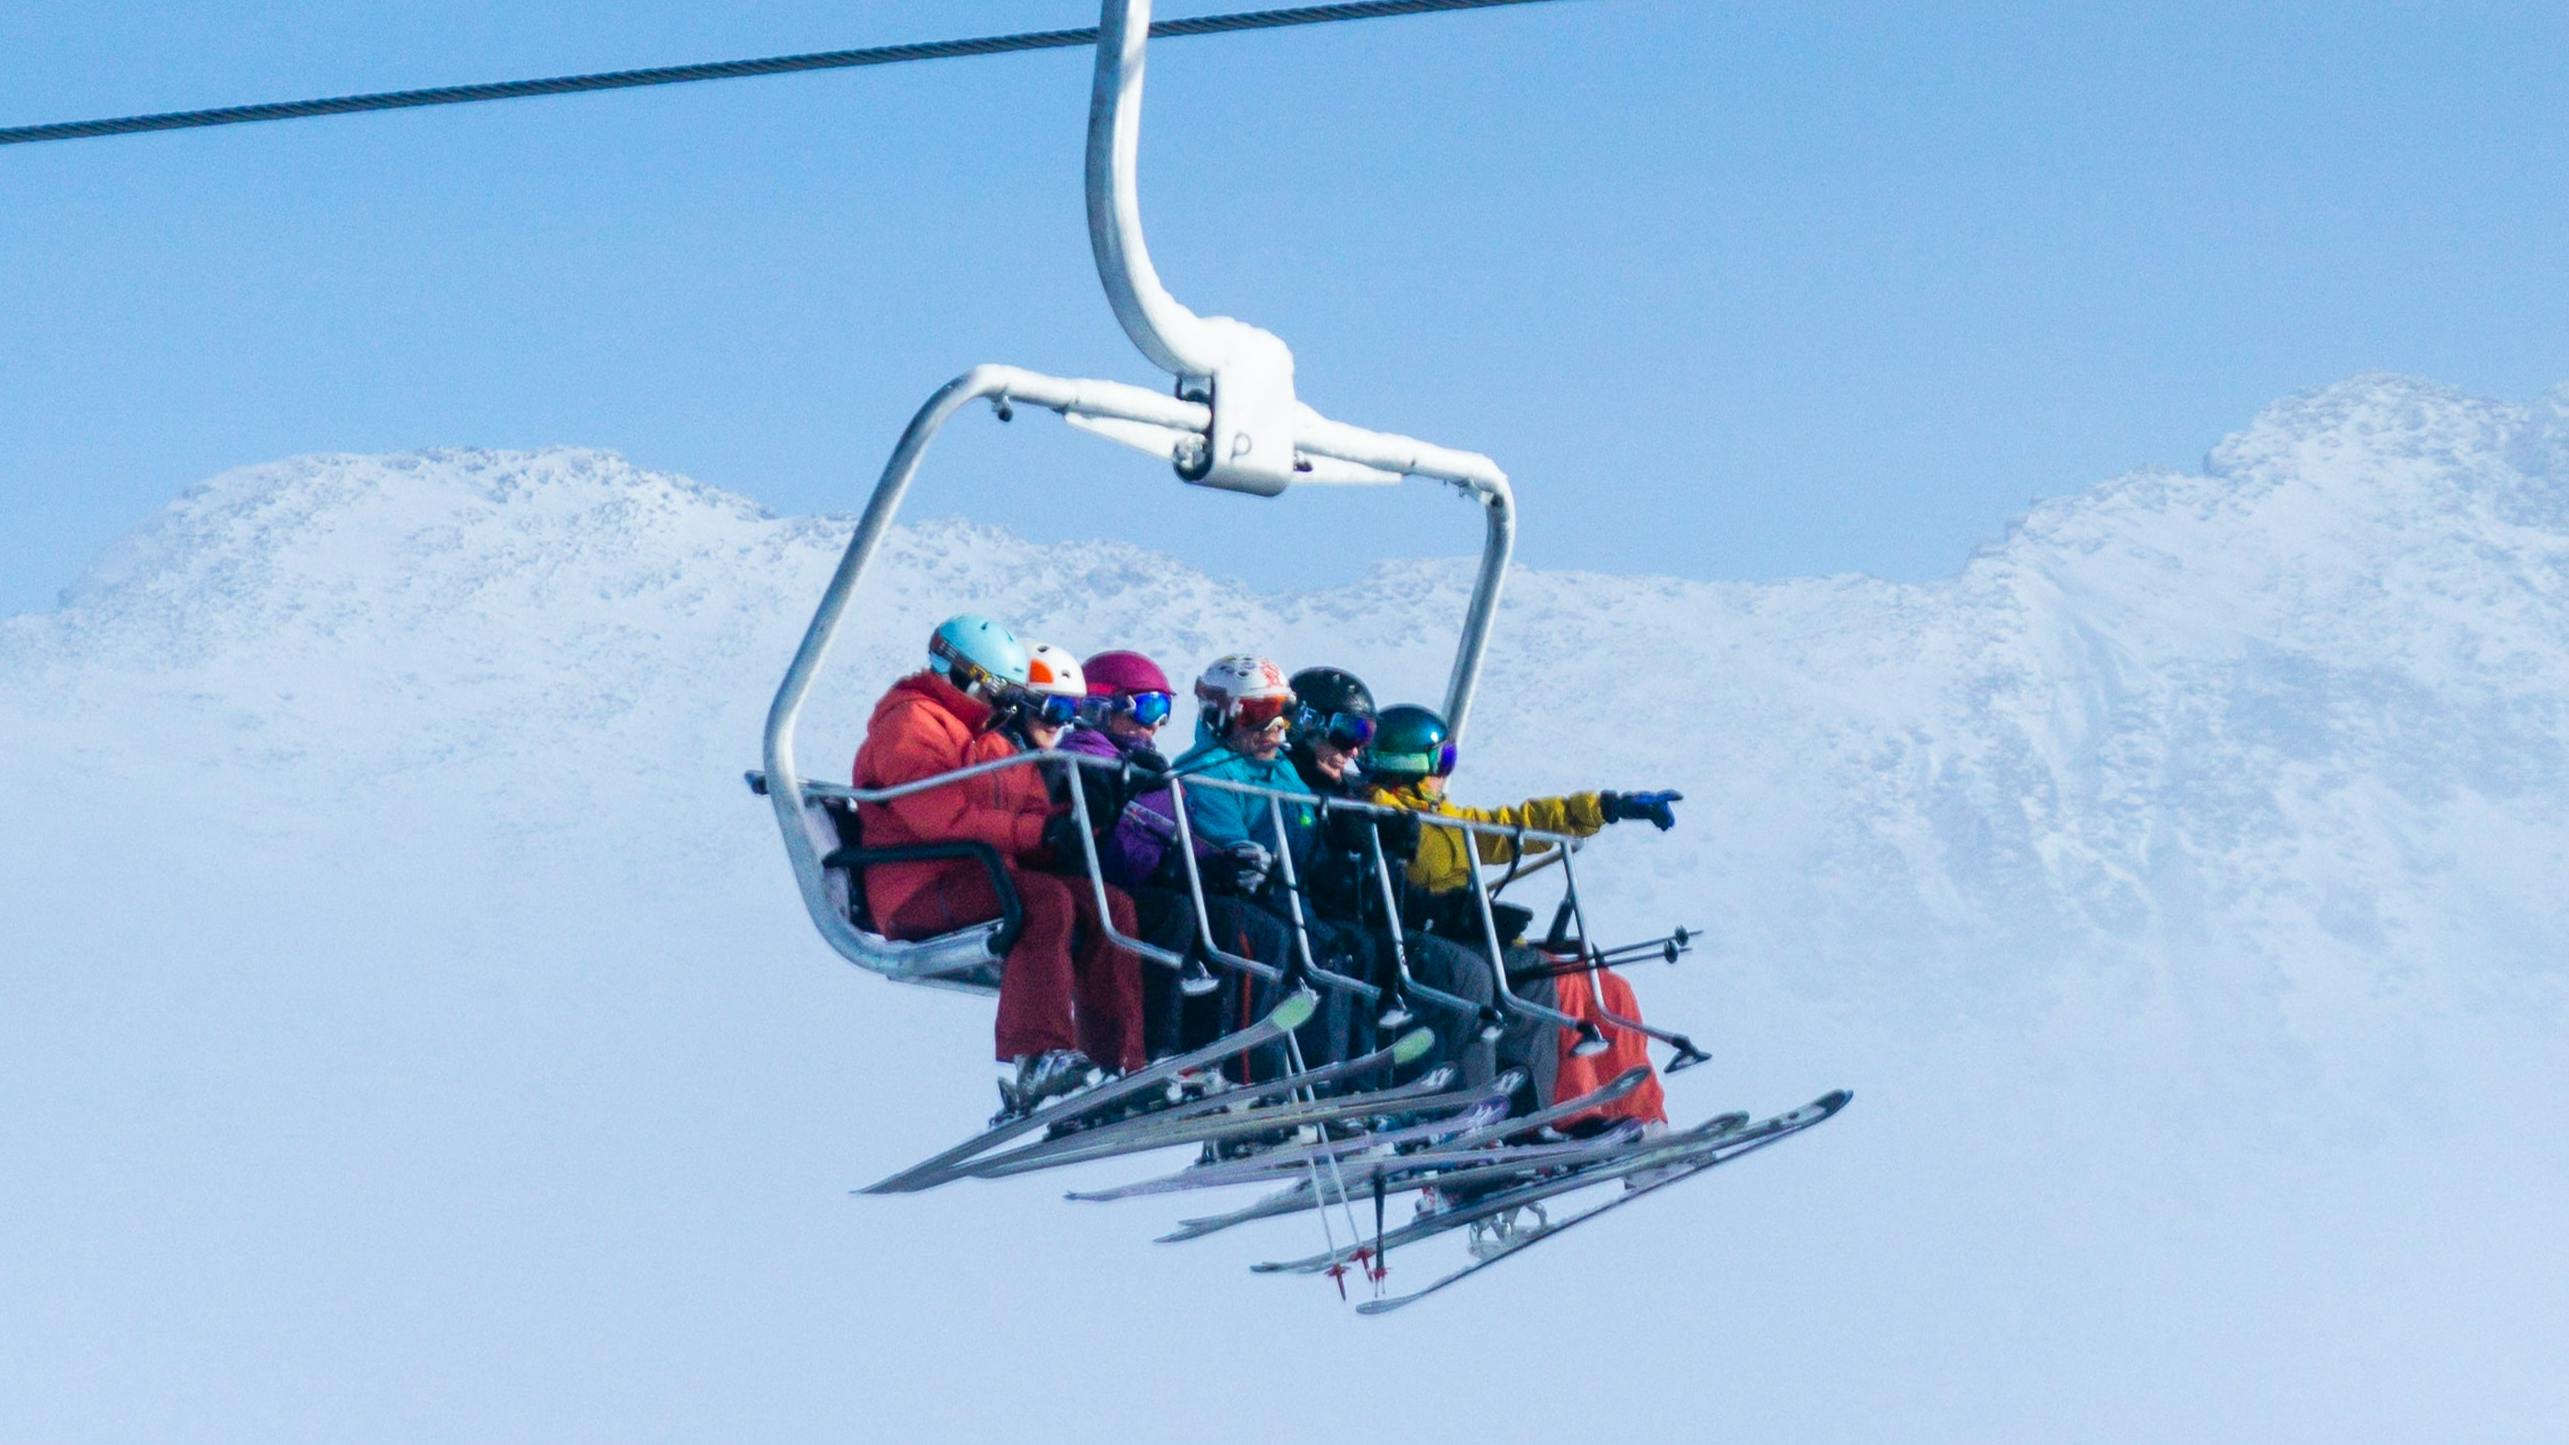 A family on a chairlift. They all have skis on and there is a snowy mountain in the background. 